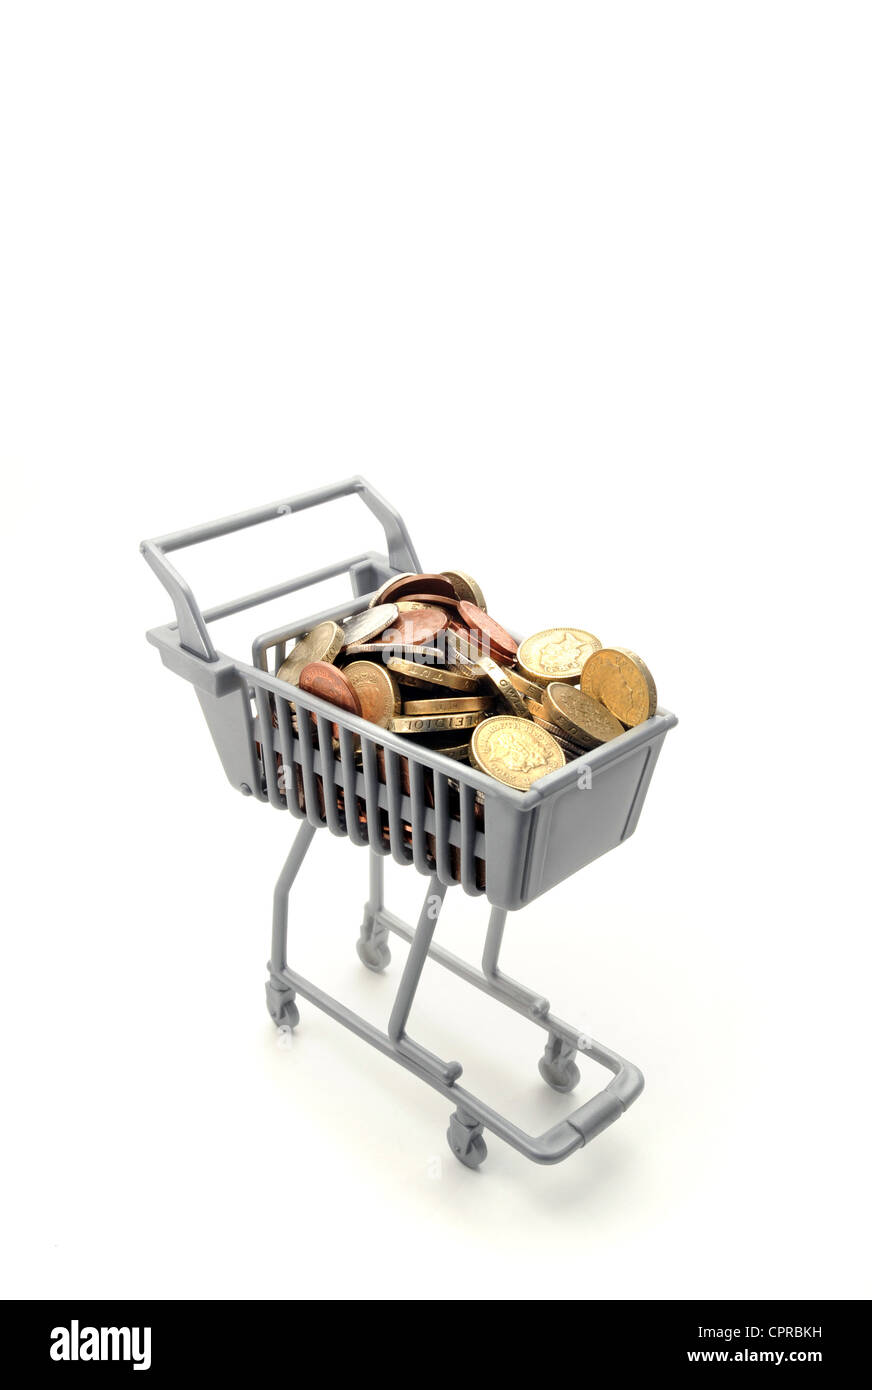 SUPERMARKET TROLLEY FULL OF BRITISH MONEY RE THE ECONOMY SHOPPERS INCOMES WAGES FOOD PRICES COST OF LIVING BILLS BUYERS ETC UK Stock Photo